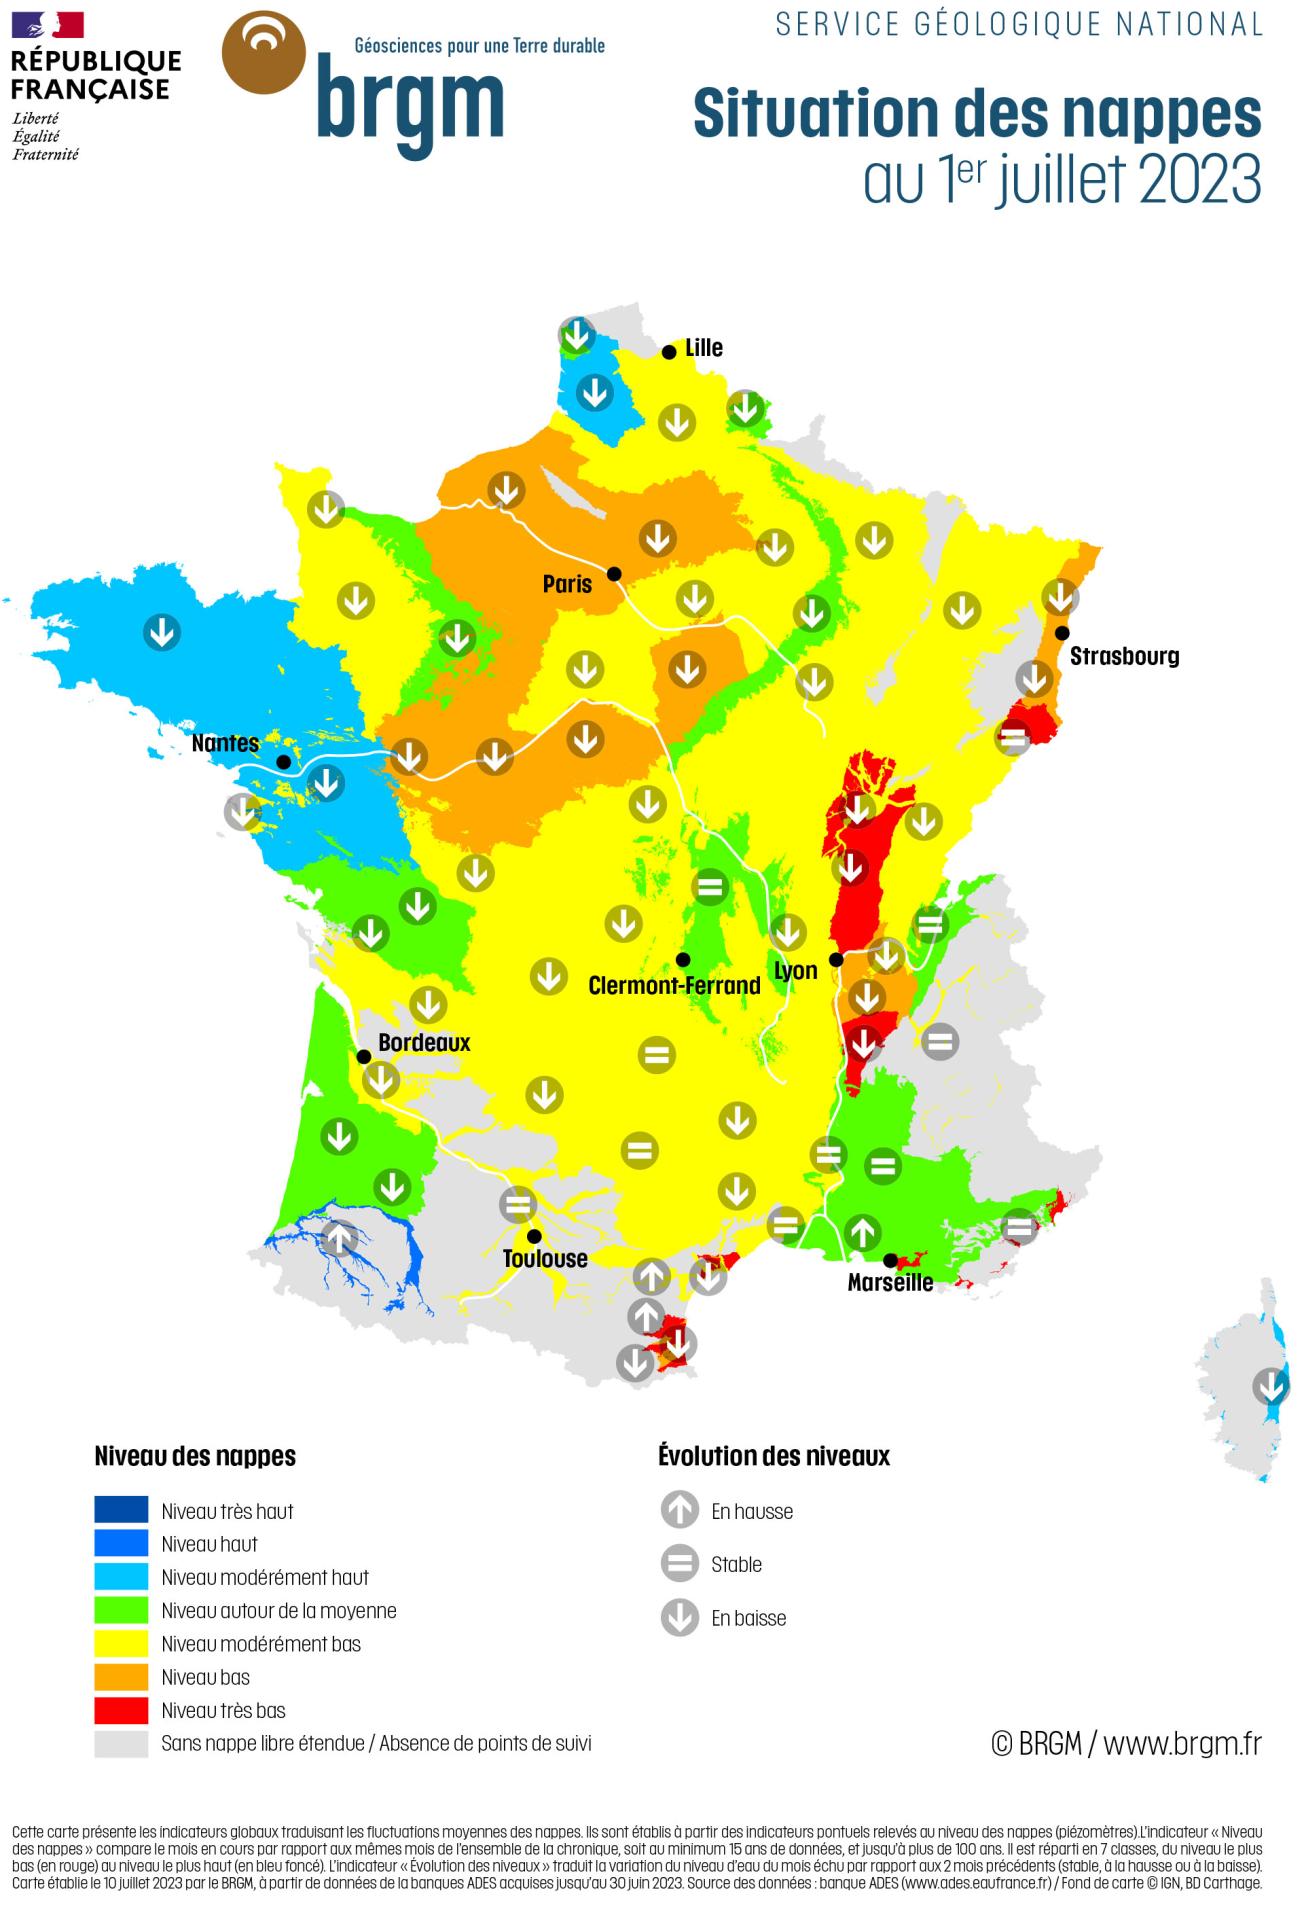 Map of groundwater levels in France on 1 July 2023.